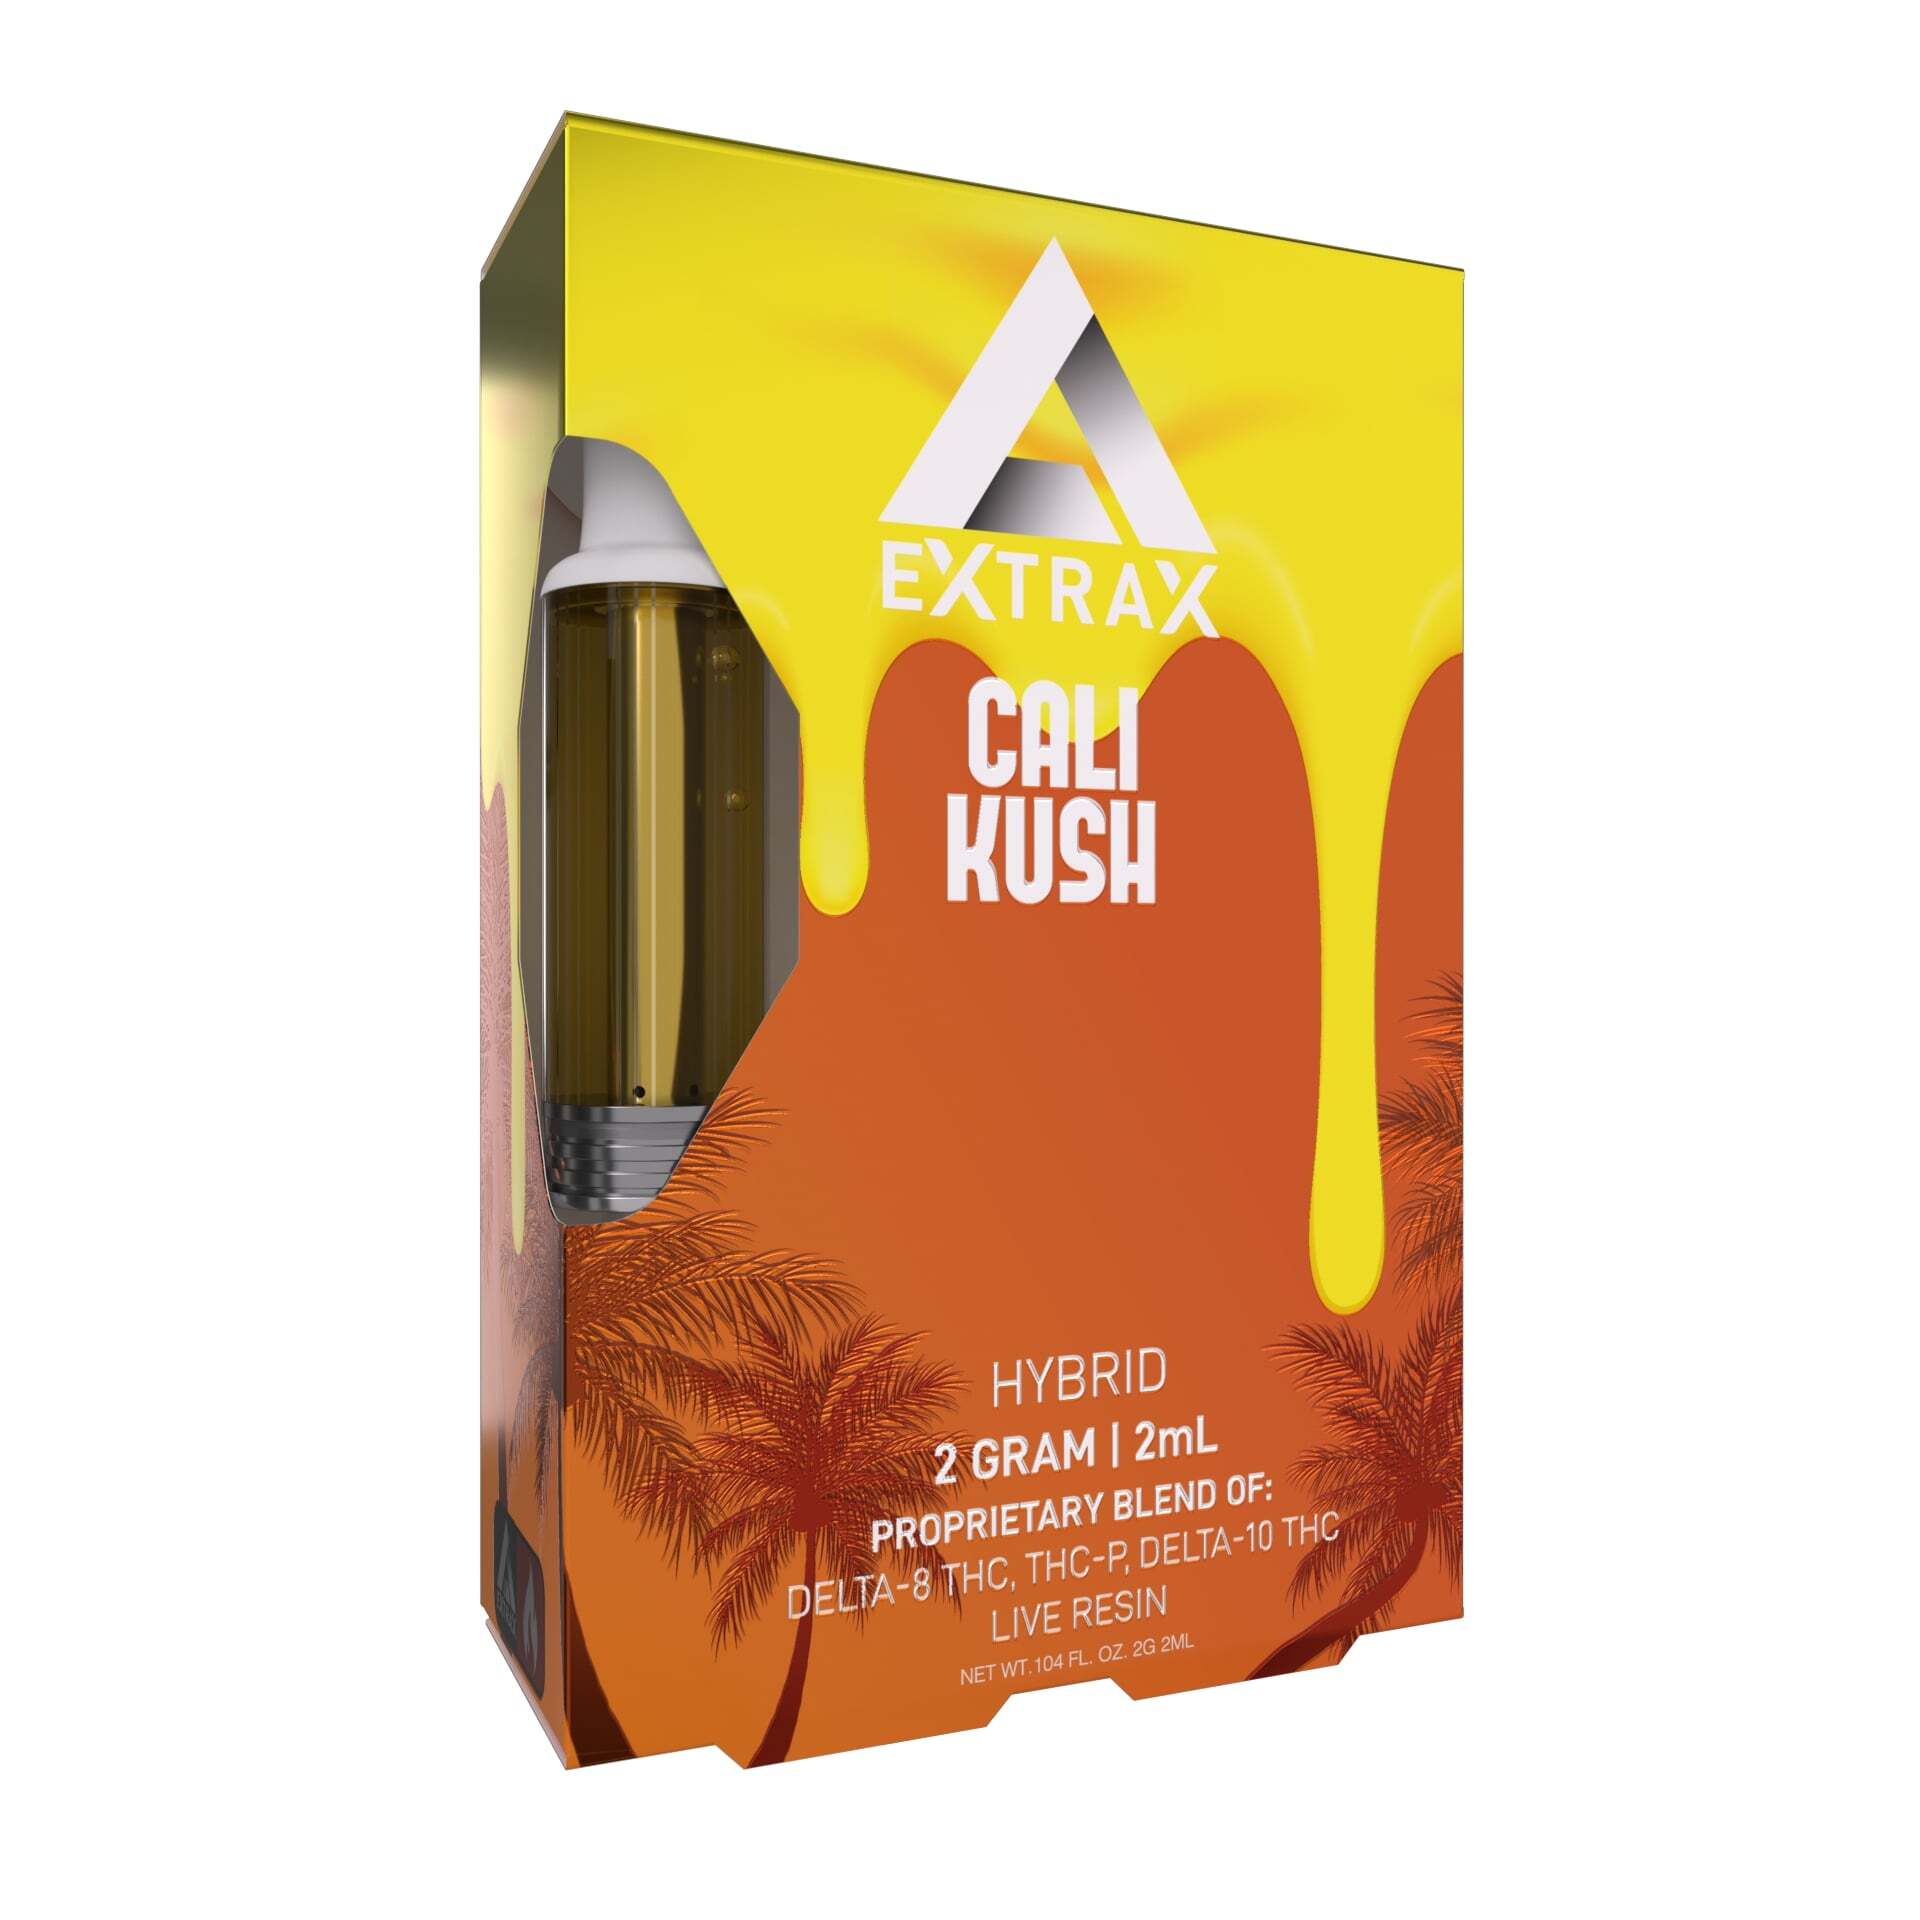 Delta Extrax Cali Kush Disposable Live Resin Carts Best Price